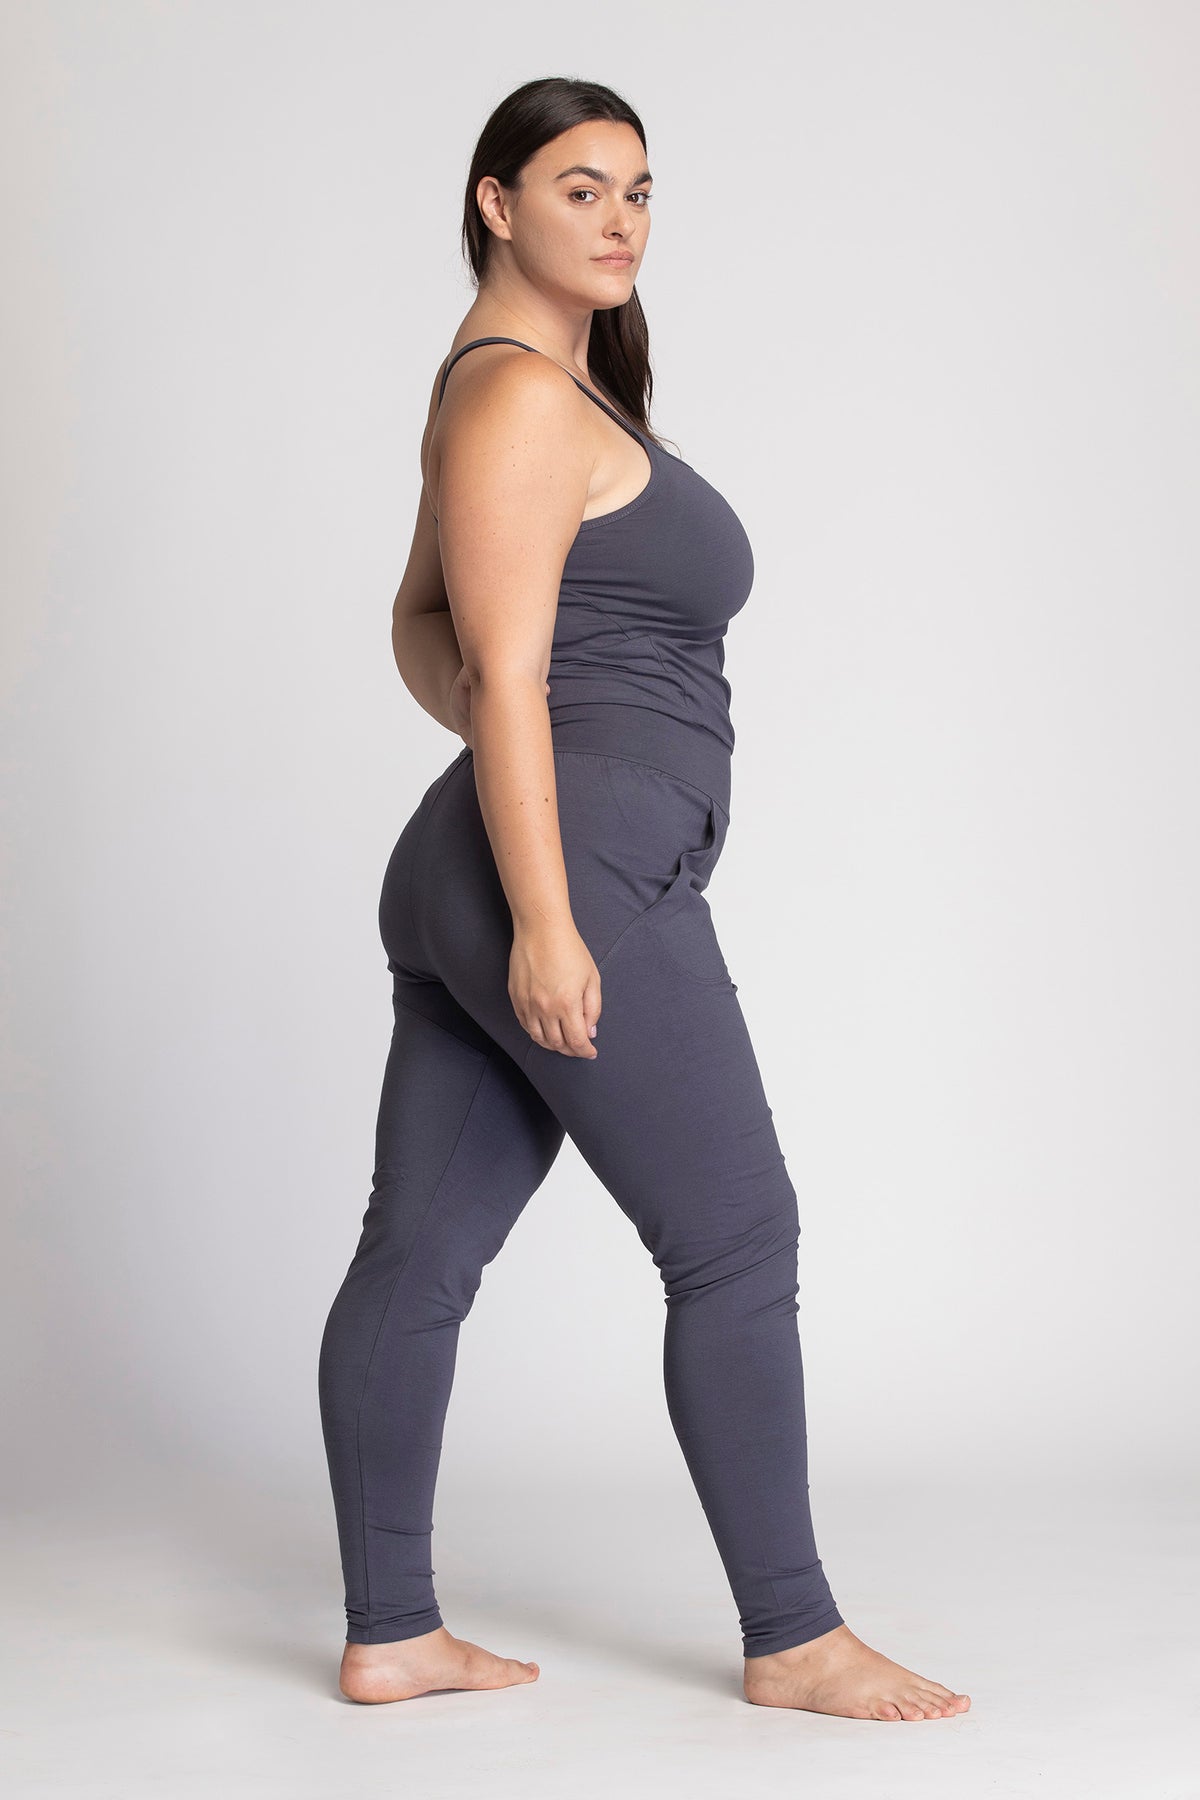 I’mPerfect Organic Cotton Long Jumpsuit 25%off